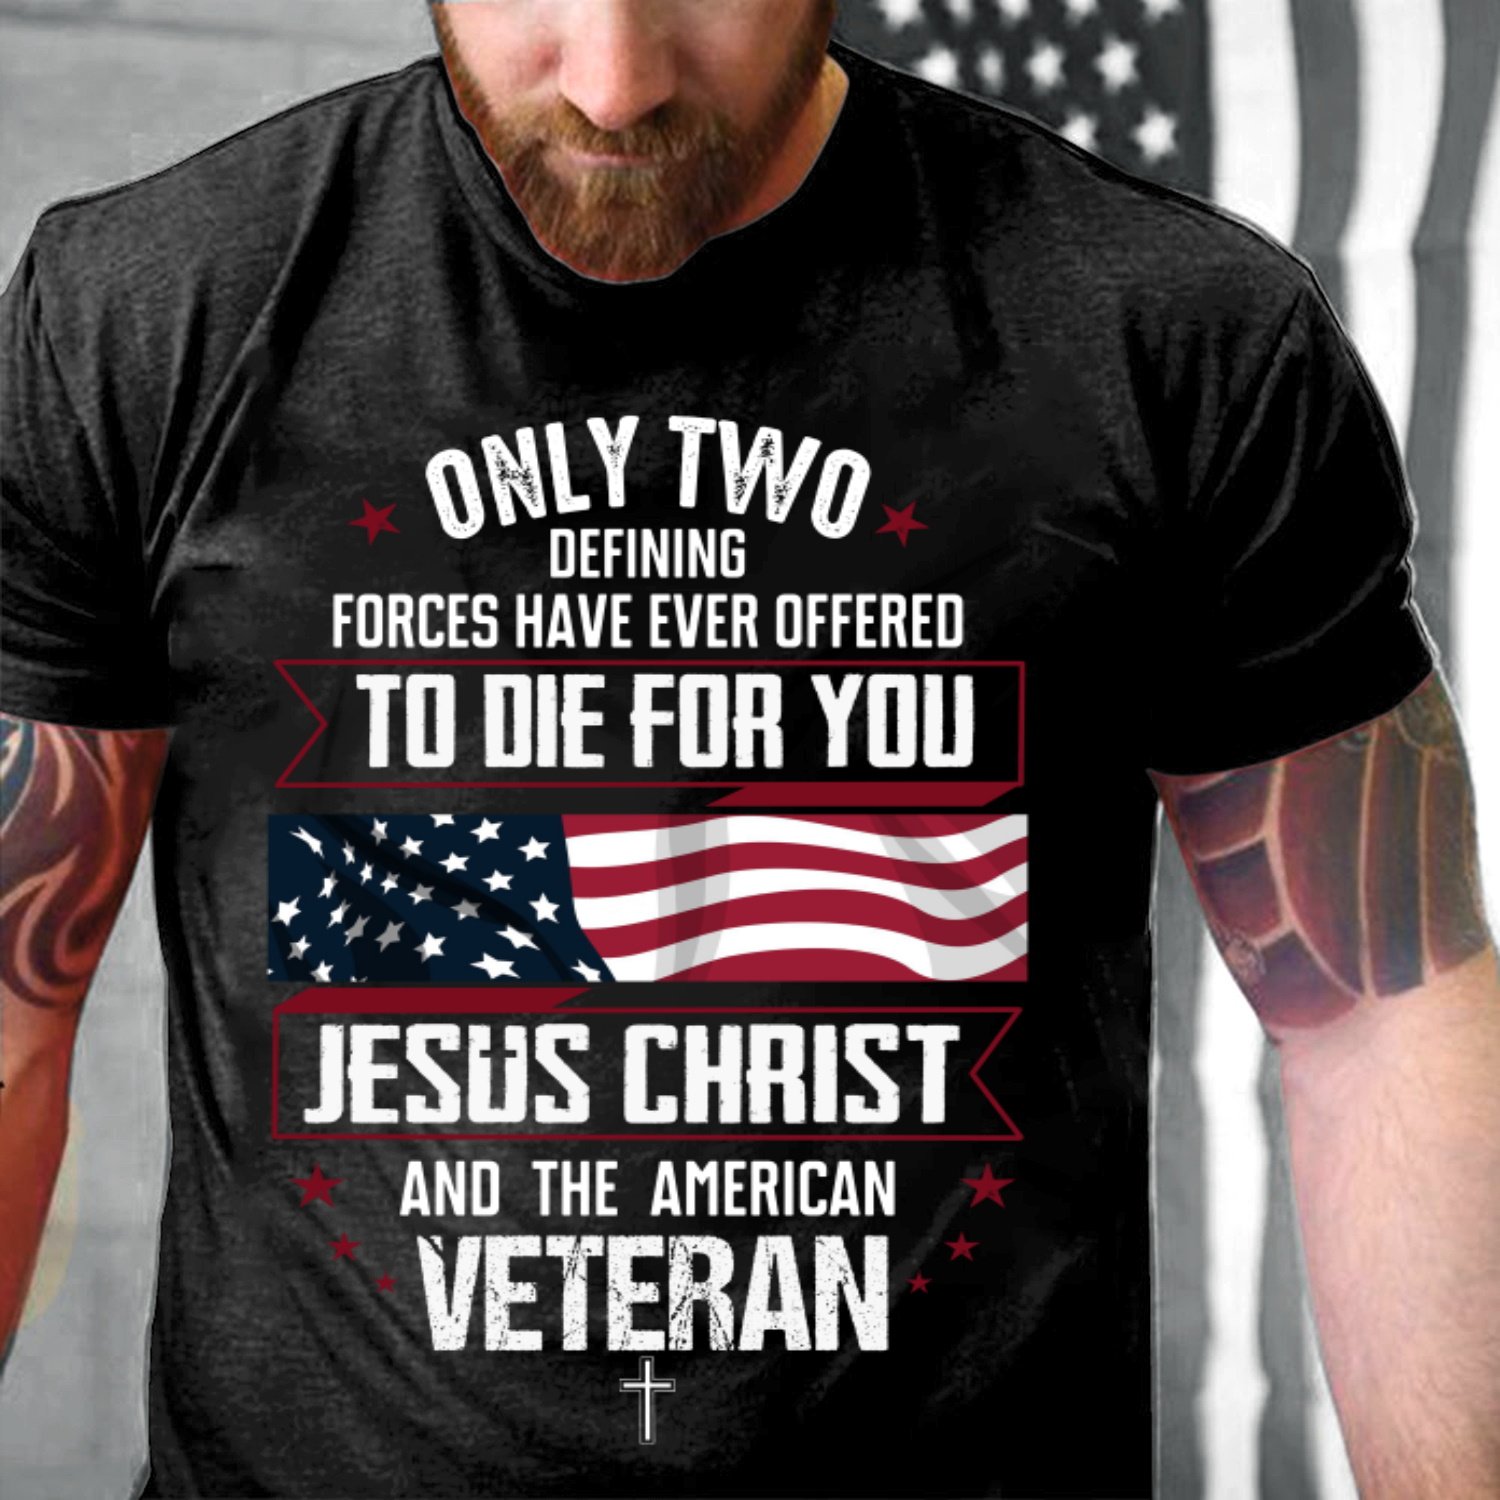 Only Two Defining Forces Have Ever Offered To Die For You T-Shirt